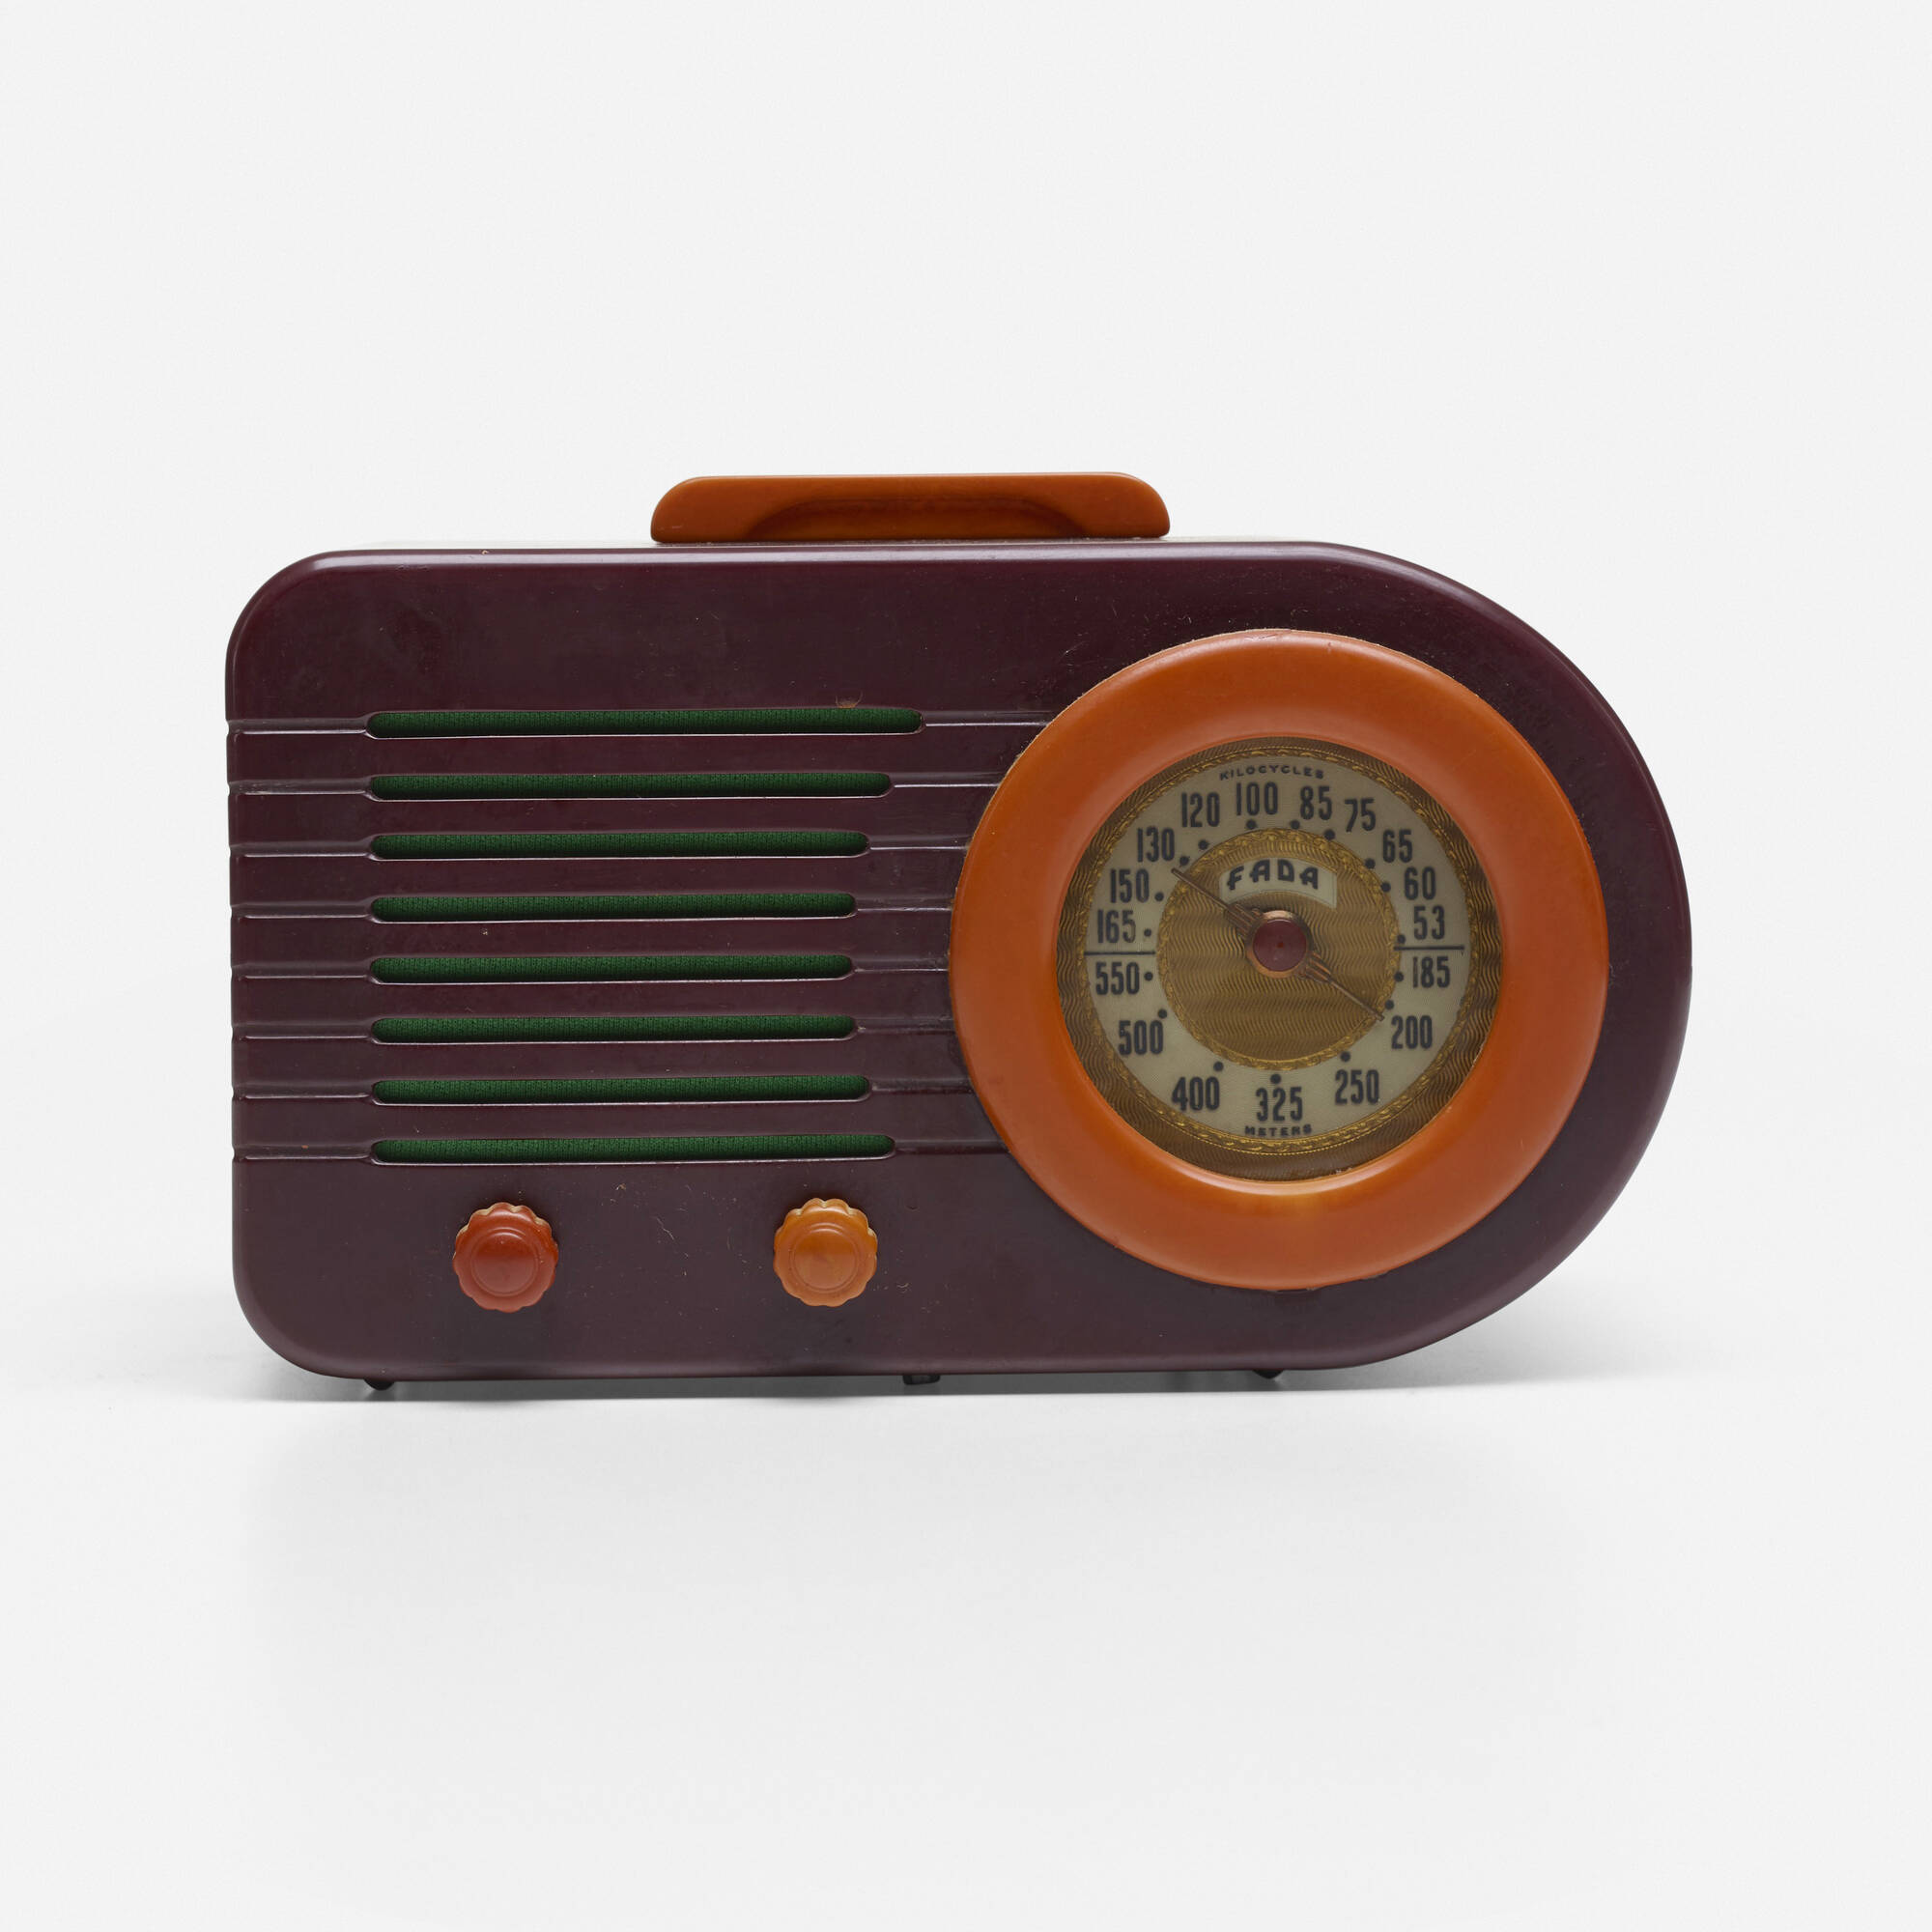 280: FADA, Bullet radio, model 1000 < Art + Design, 30 July 2020 < Auctions  | Wright: Auctions of Art and Design